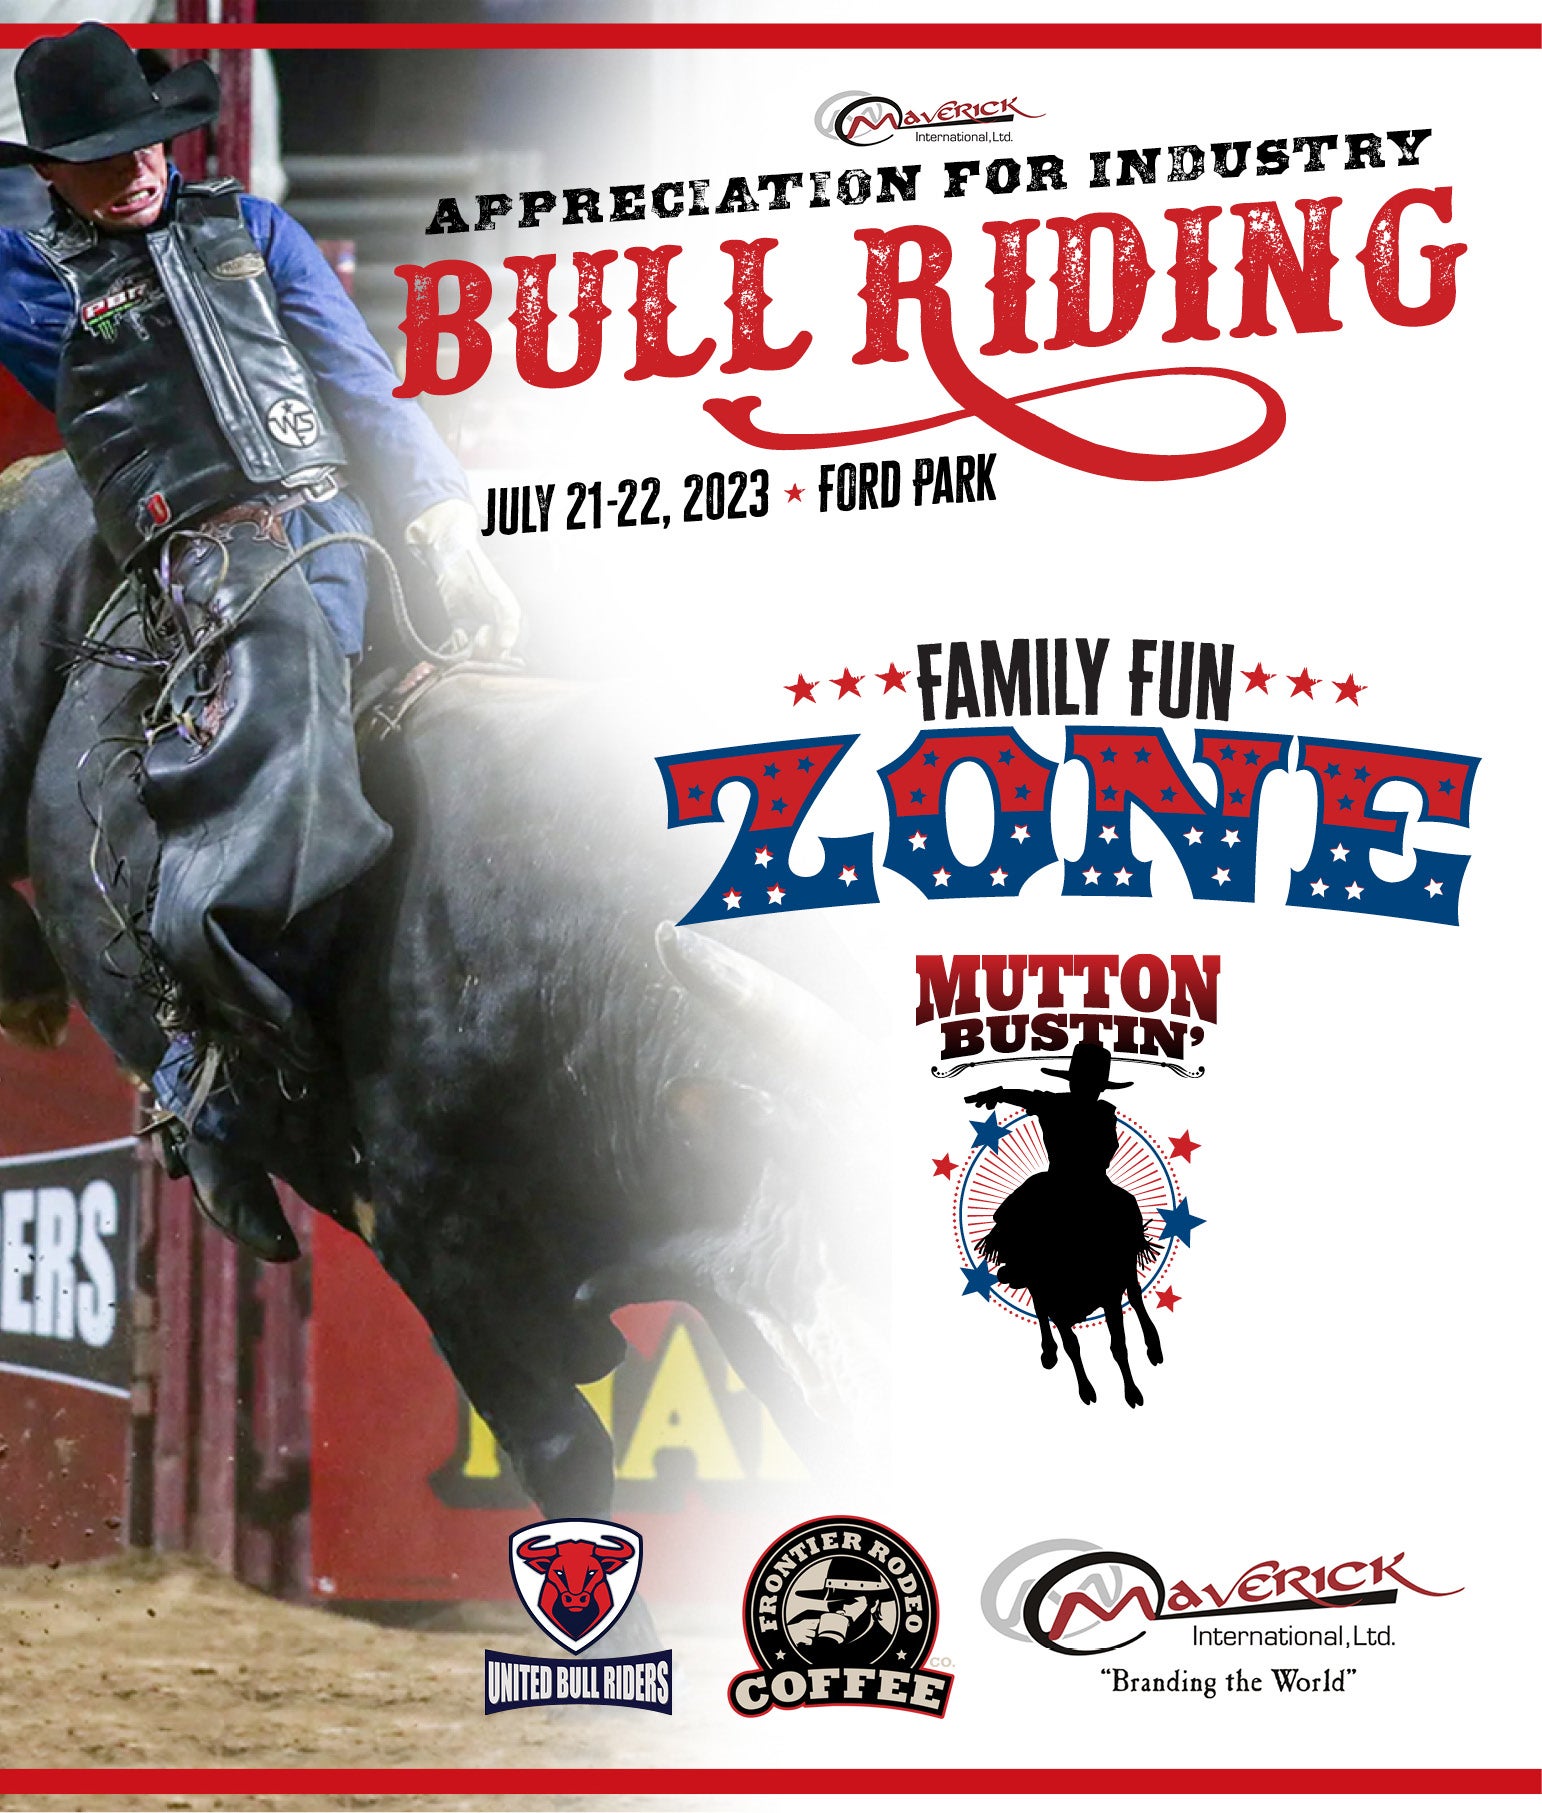 More Info for United Bull Riders